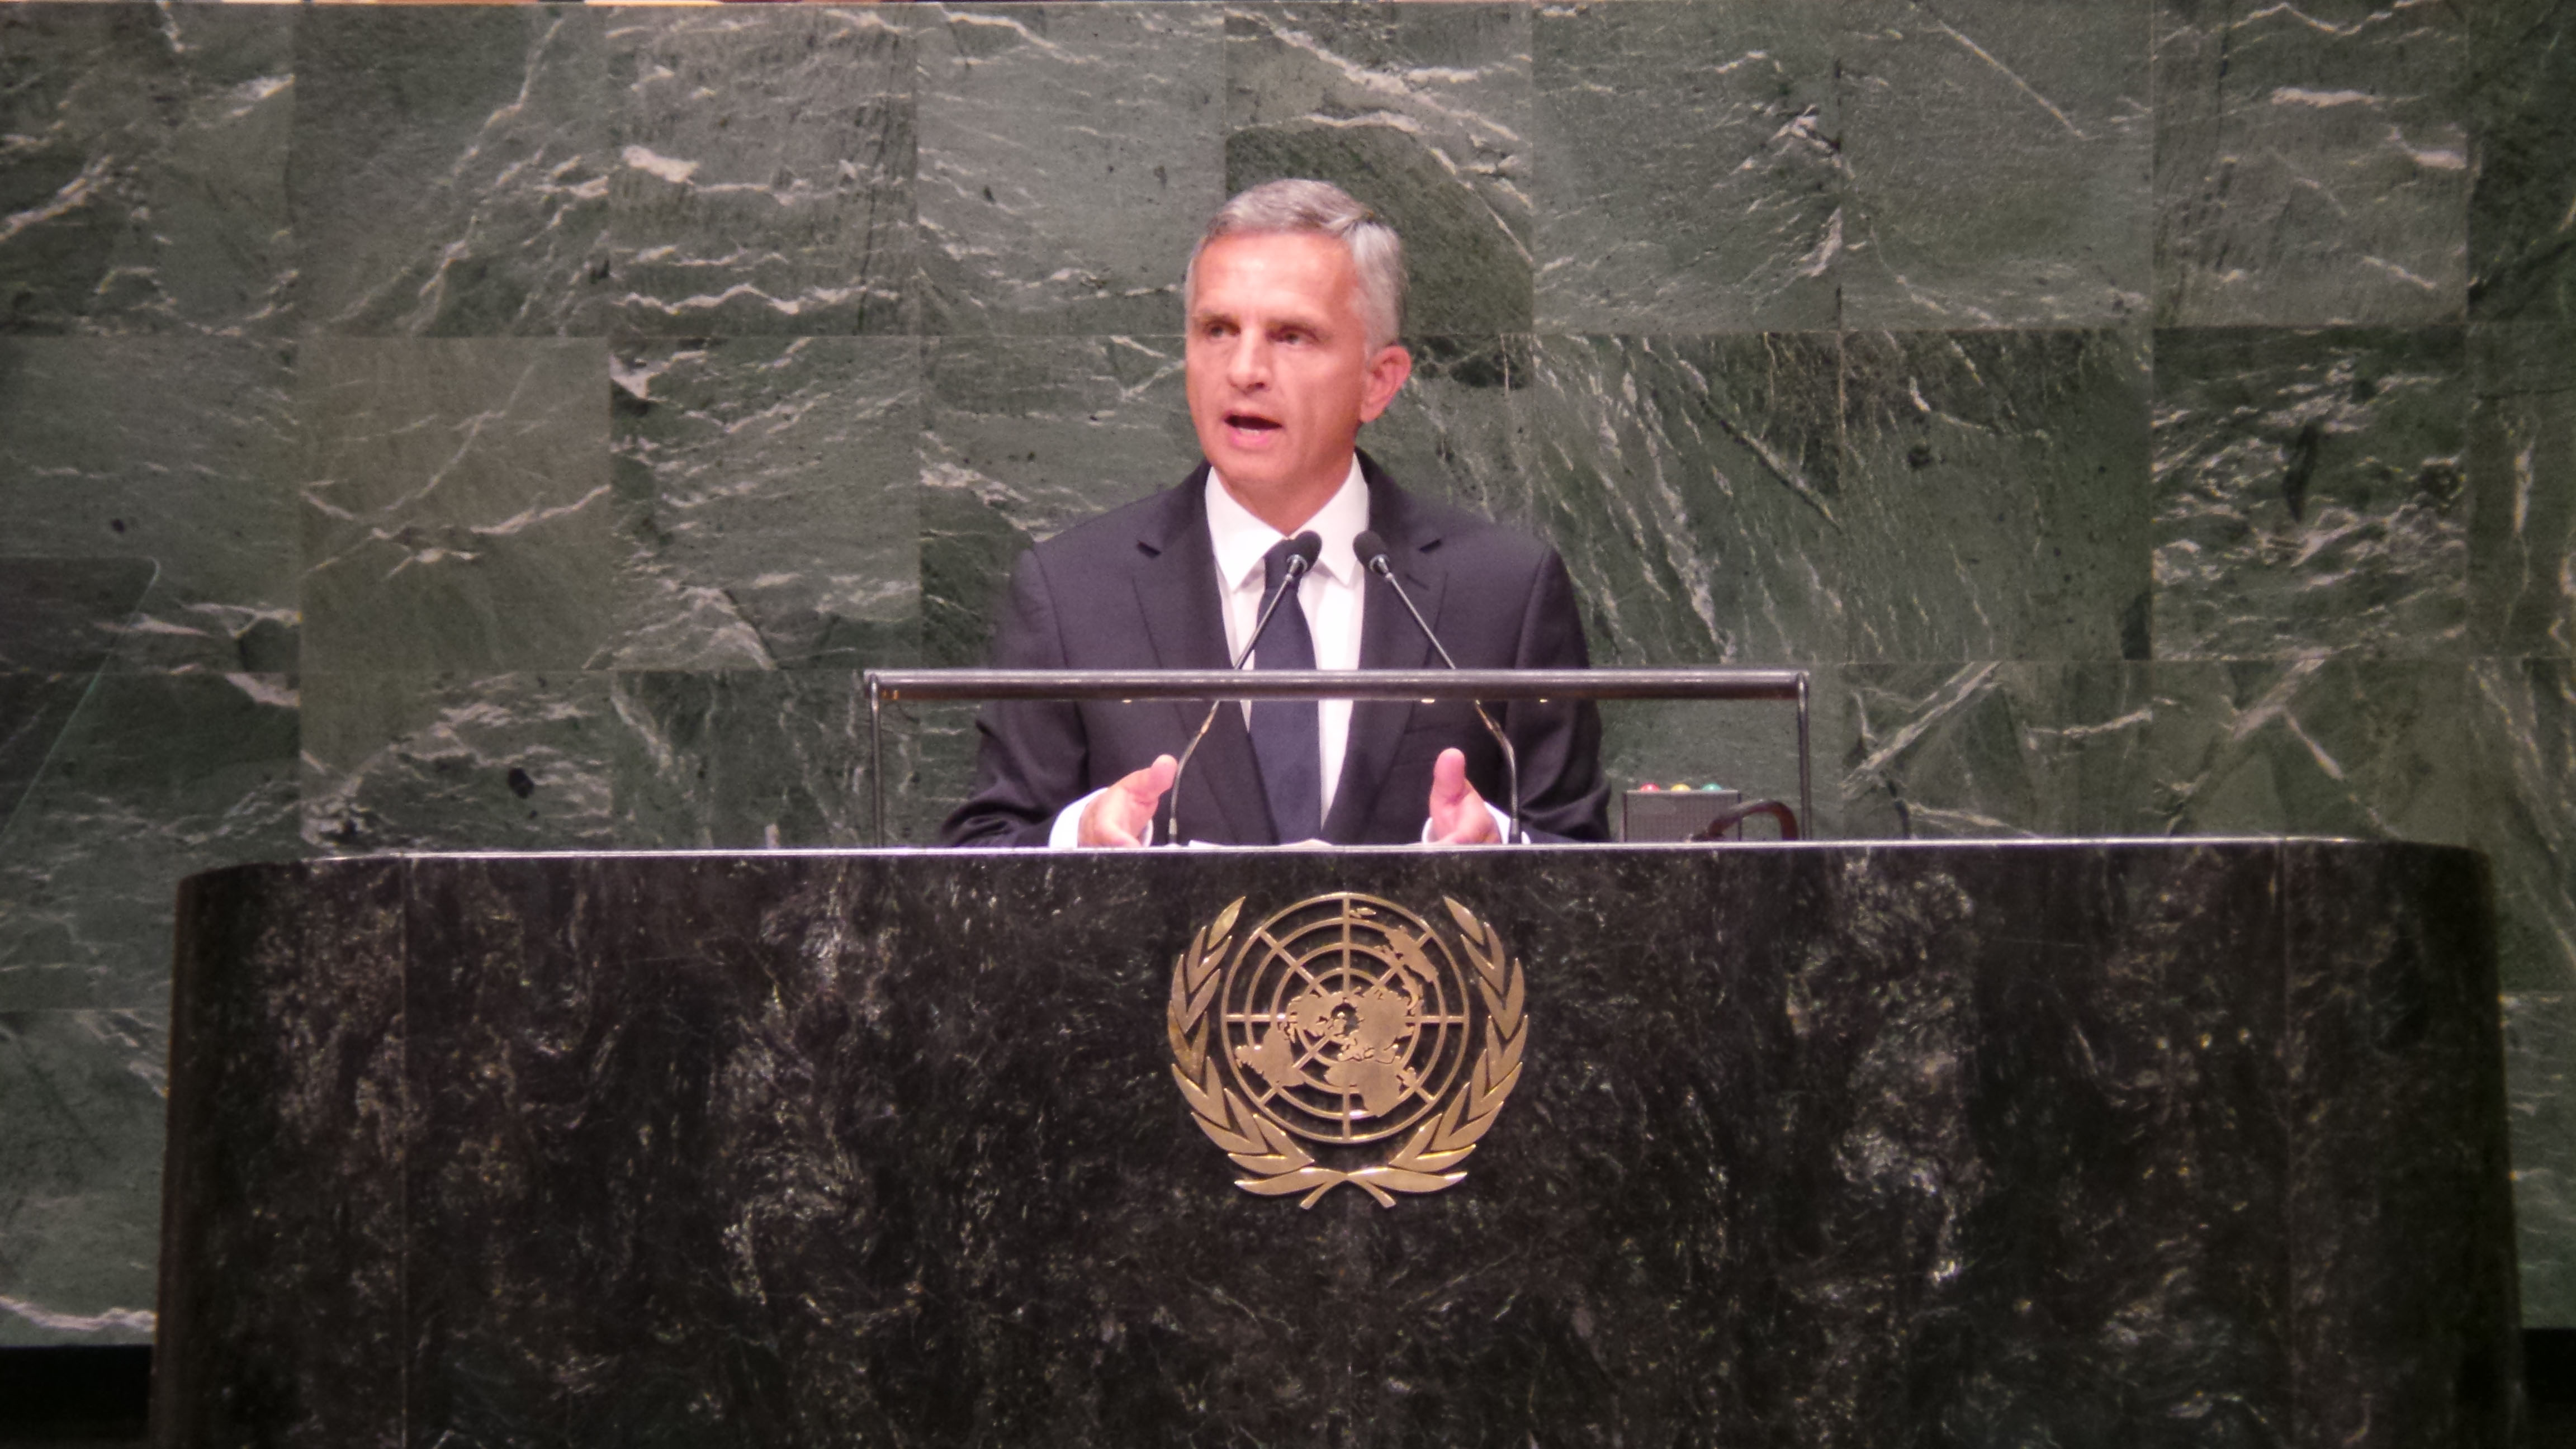 The President of the Swiss Confederation, Didier Burkhalter, speeks at the UN General Assembly in New York